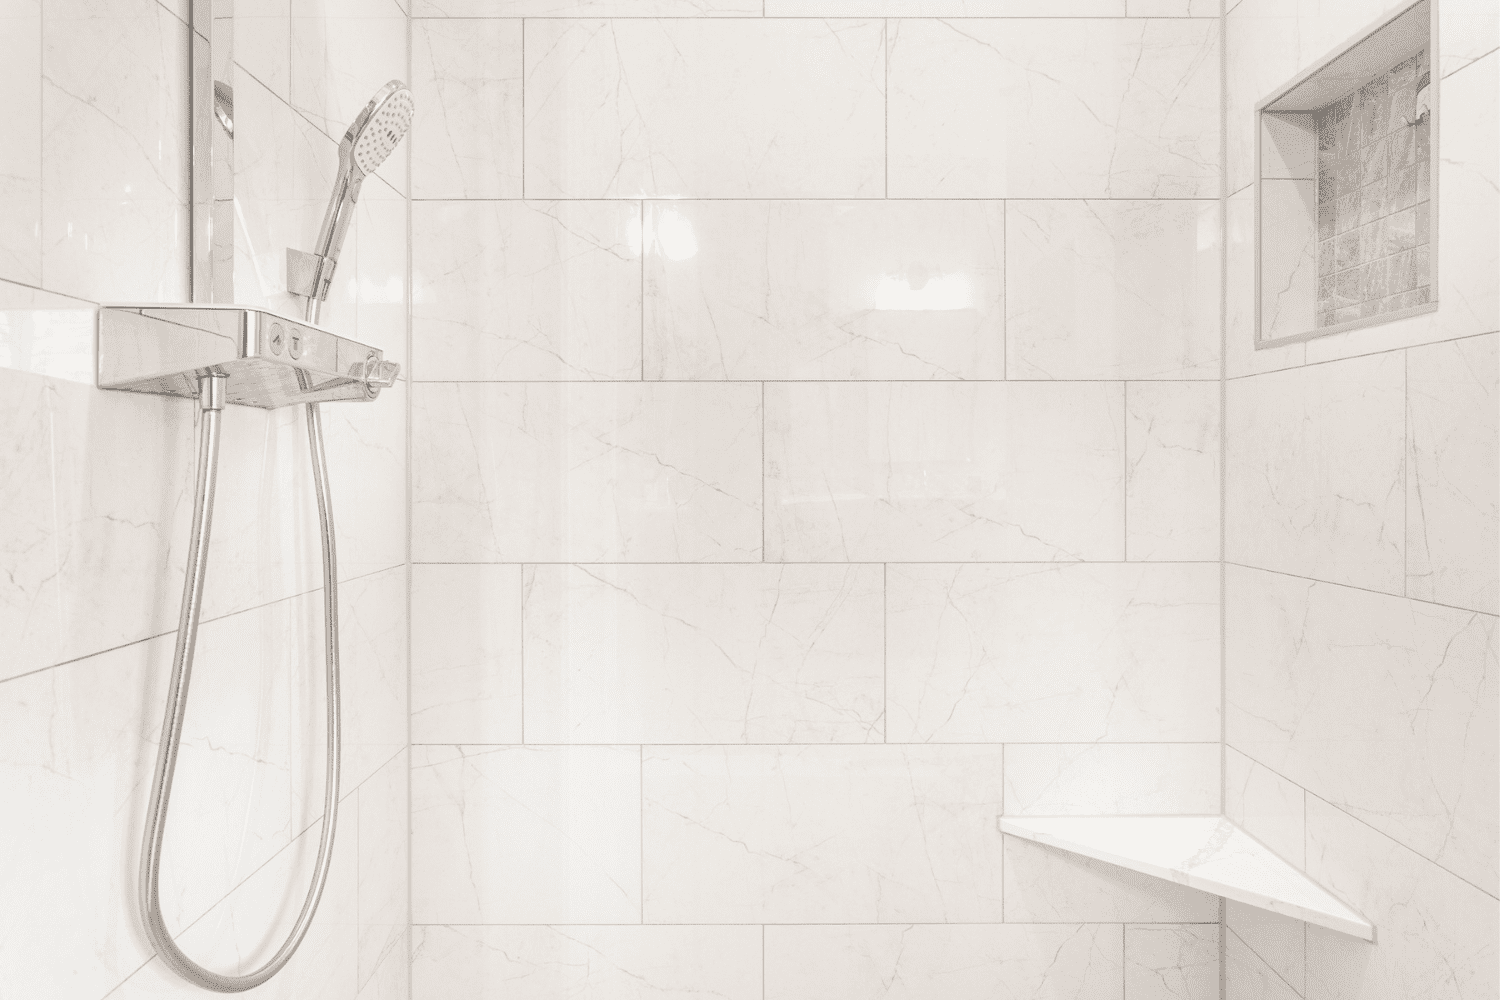 Nicholas Design Build | A white tiled shower with a handheld shower head in a master bath remodel.